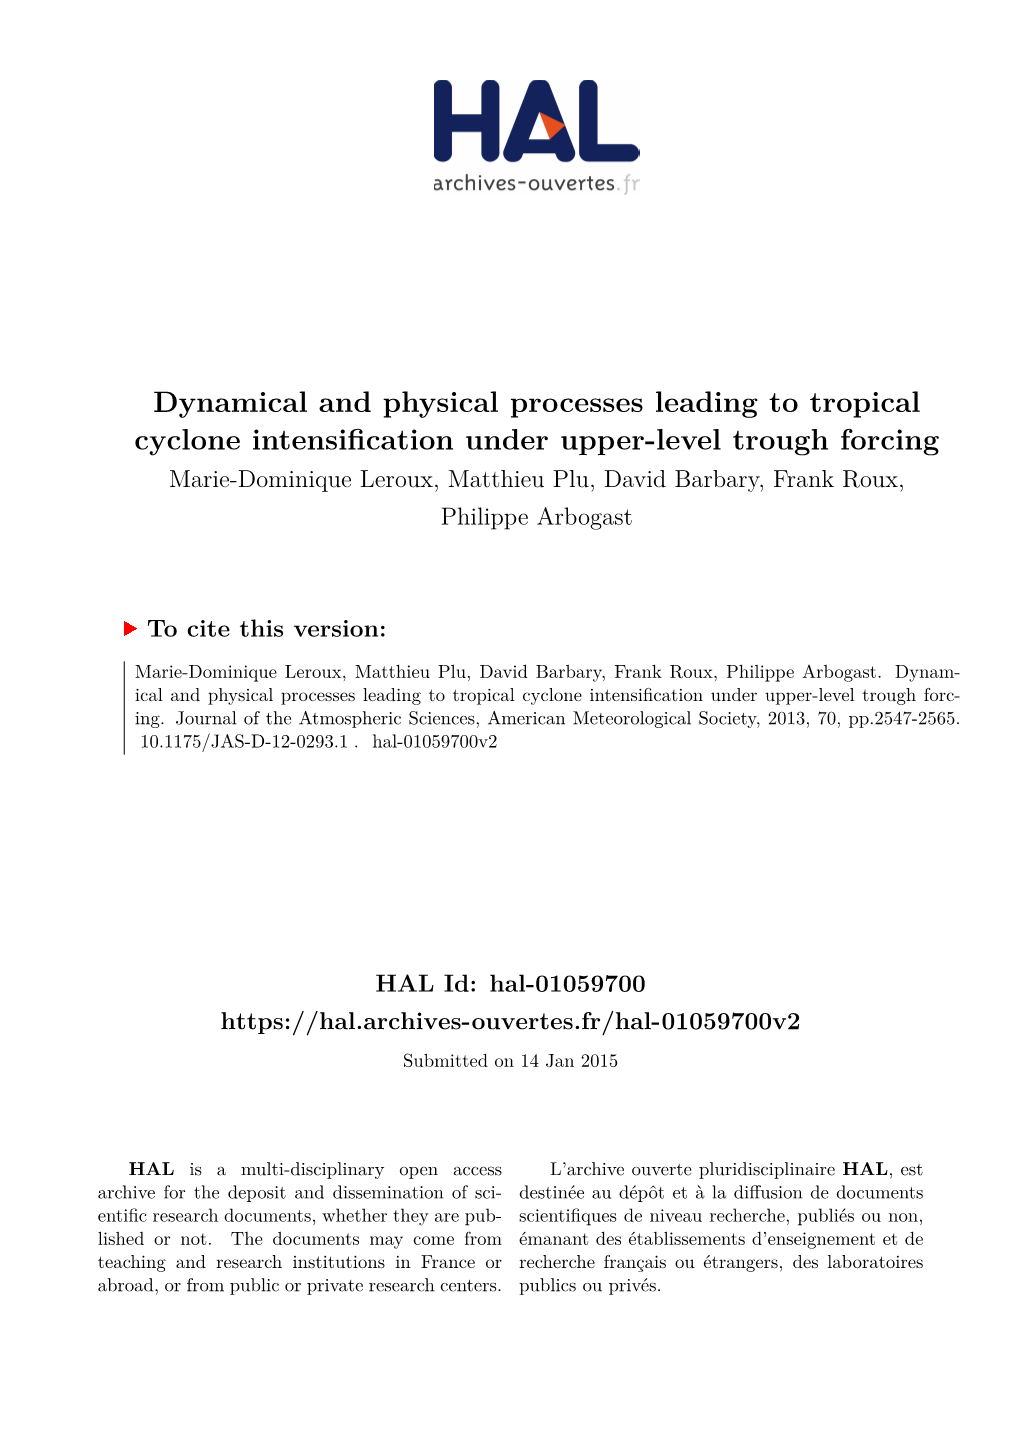 Dynamical and Physical Processes Leading to Tropical Cyclone